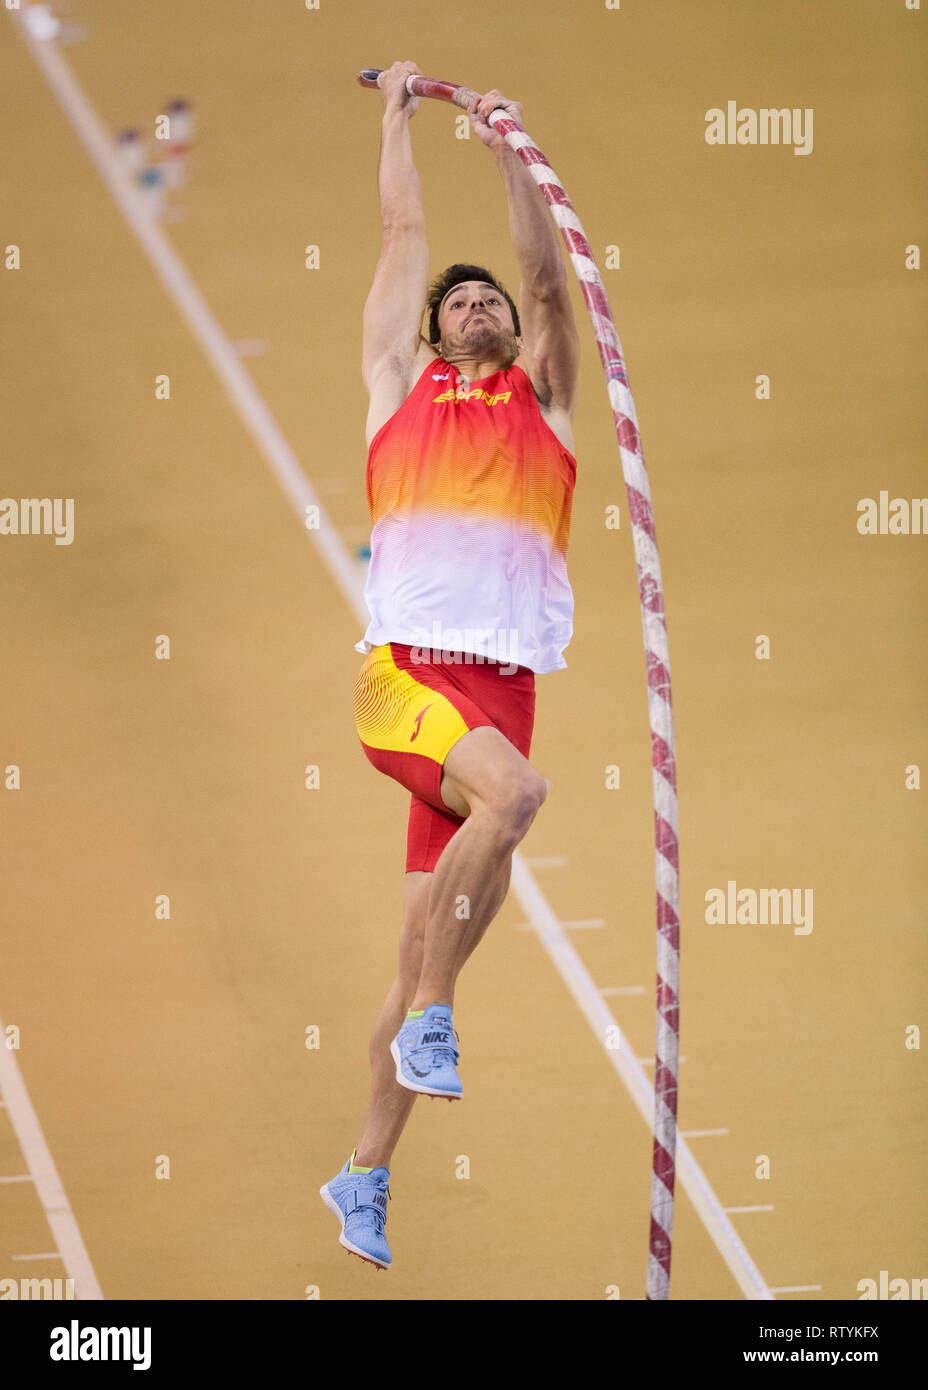 Glasgow, Scotland, UK. 3rd March, 2019. Jorge ureña during the Men's Pole Vault part of the male Heptatholn on day 3 of the European Indoor Athletics Championships at the Emirates Arena in Glasgow, Scotland. (Photo by Scottish Borders Media/Alamy Live News)  Editorial use only, license required for commercial use. No use in betting. Credit: Scottish Borders Media/Alamy Live News Stock Photo